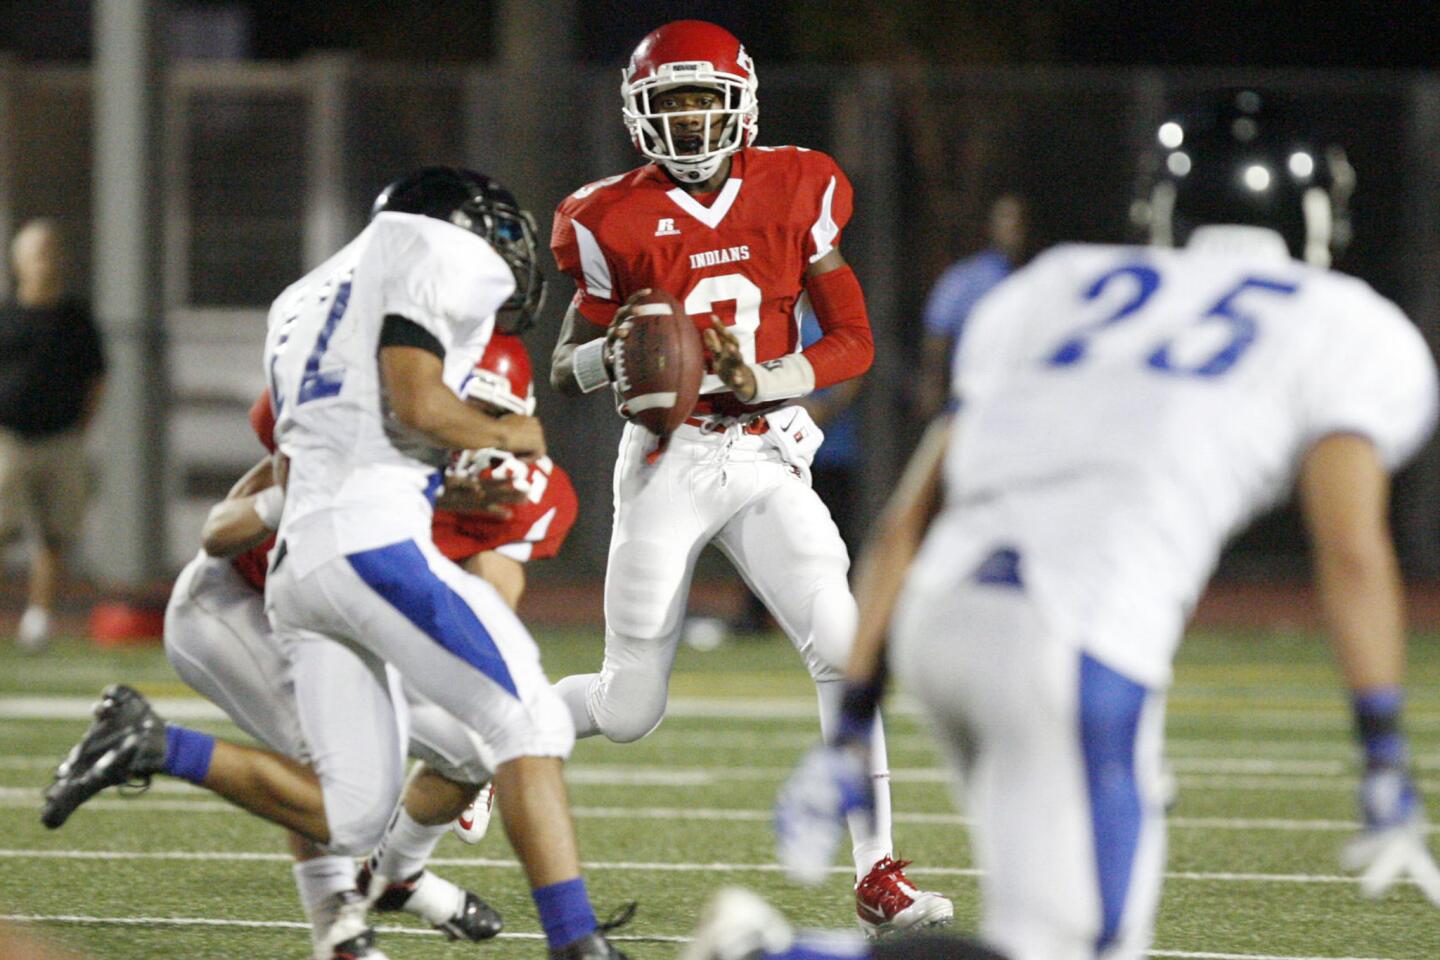 Burroughs' Oharjee Brown, center, looks for an open pass during a game against North Hollywood at John Burroughs High School in Burbank on Friday, September 7, 2012.